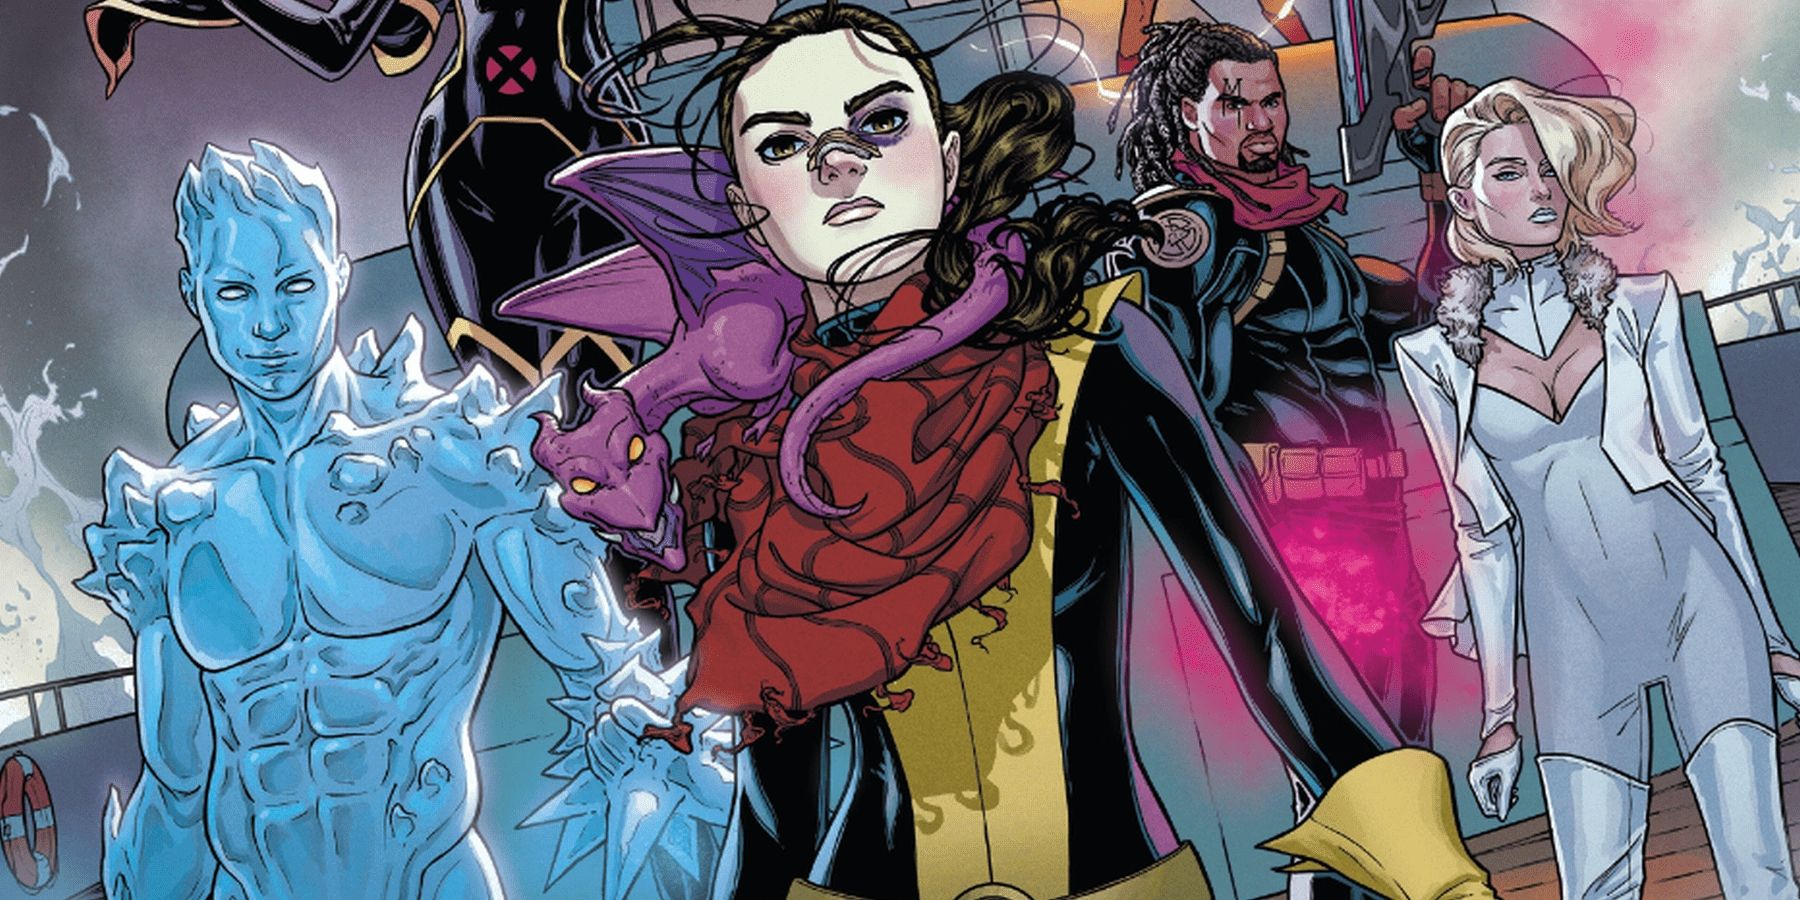 X-Men - Kitty Pryde with Ice Man, Storm, Emma Frost, and Bishop